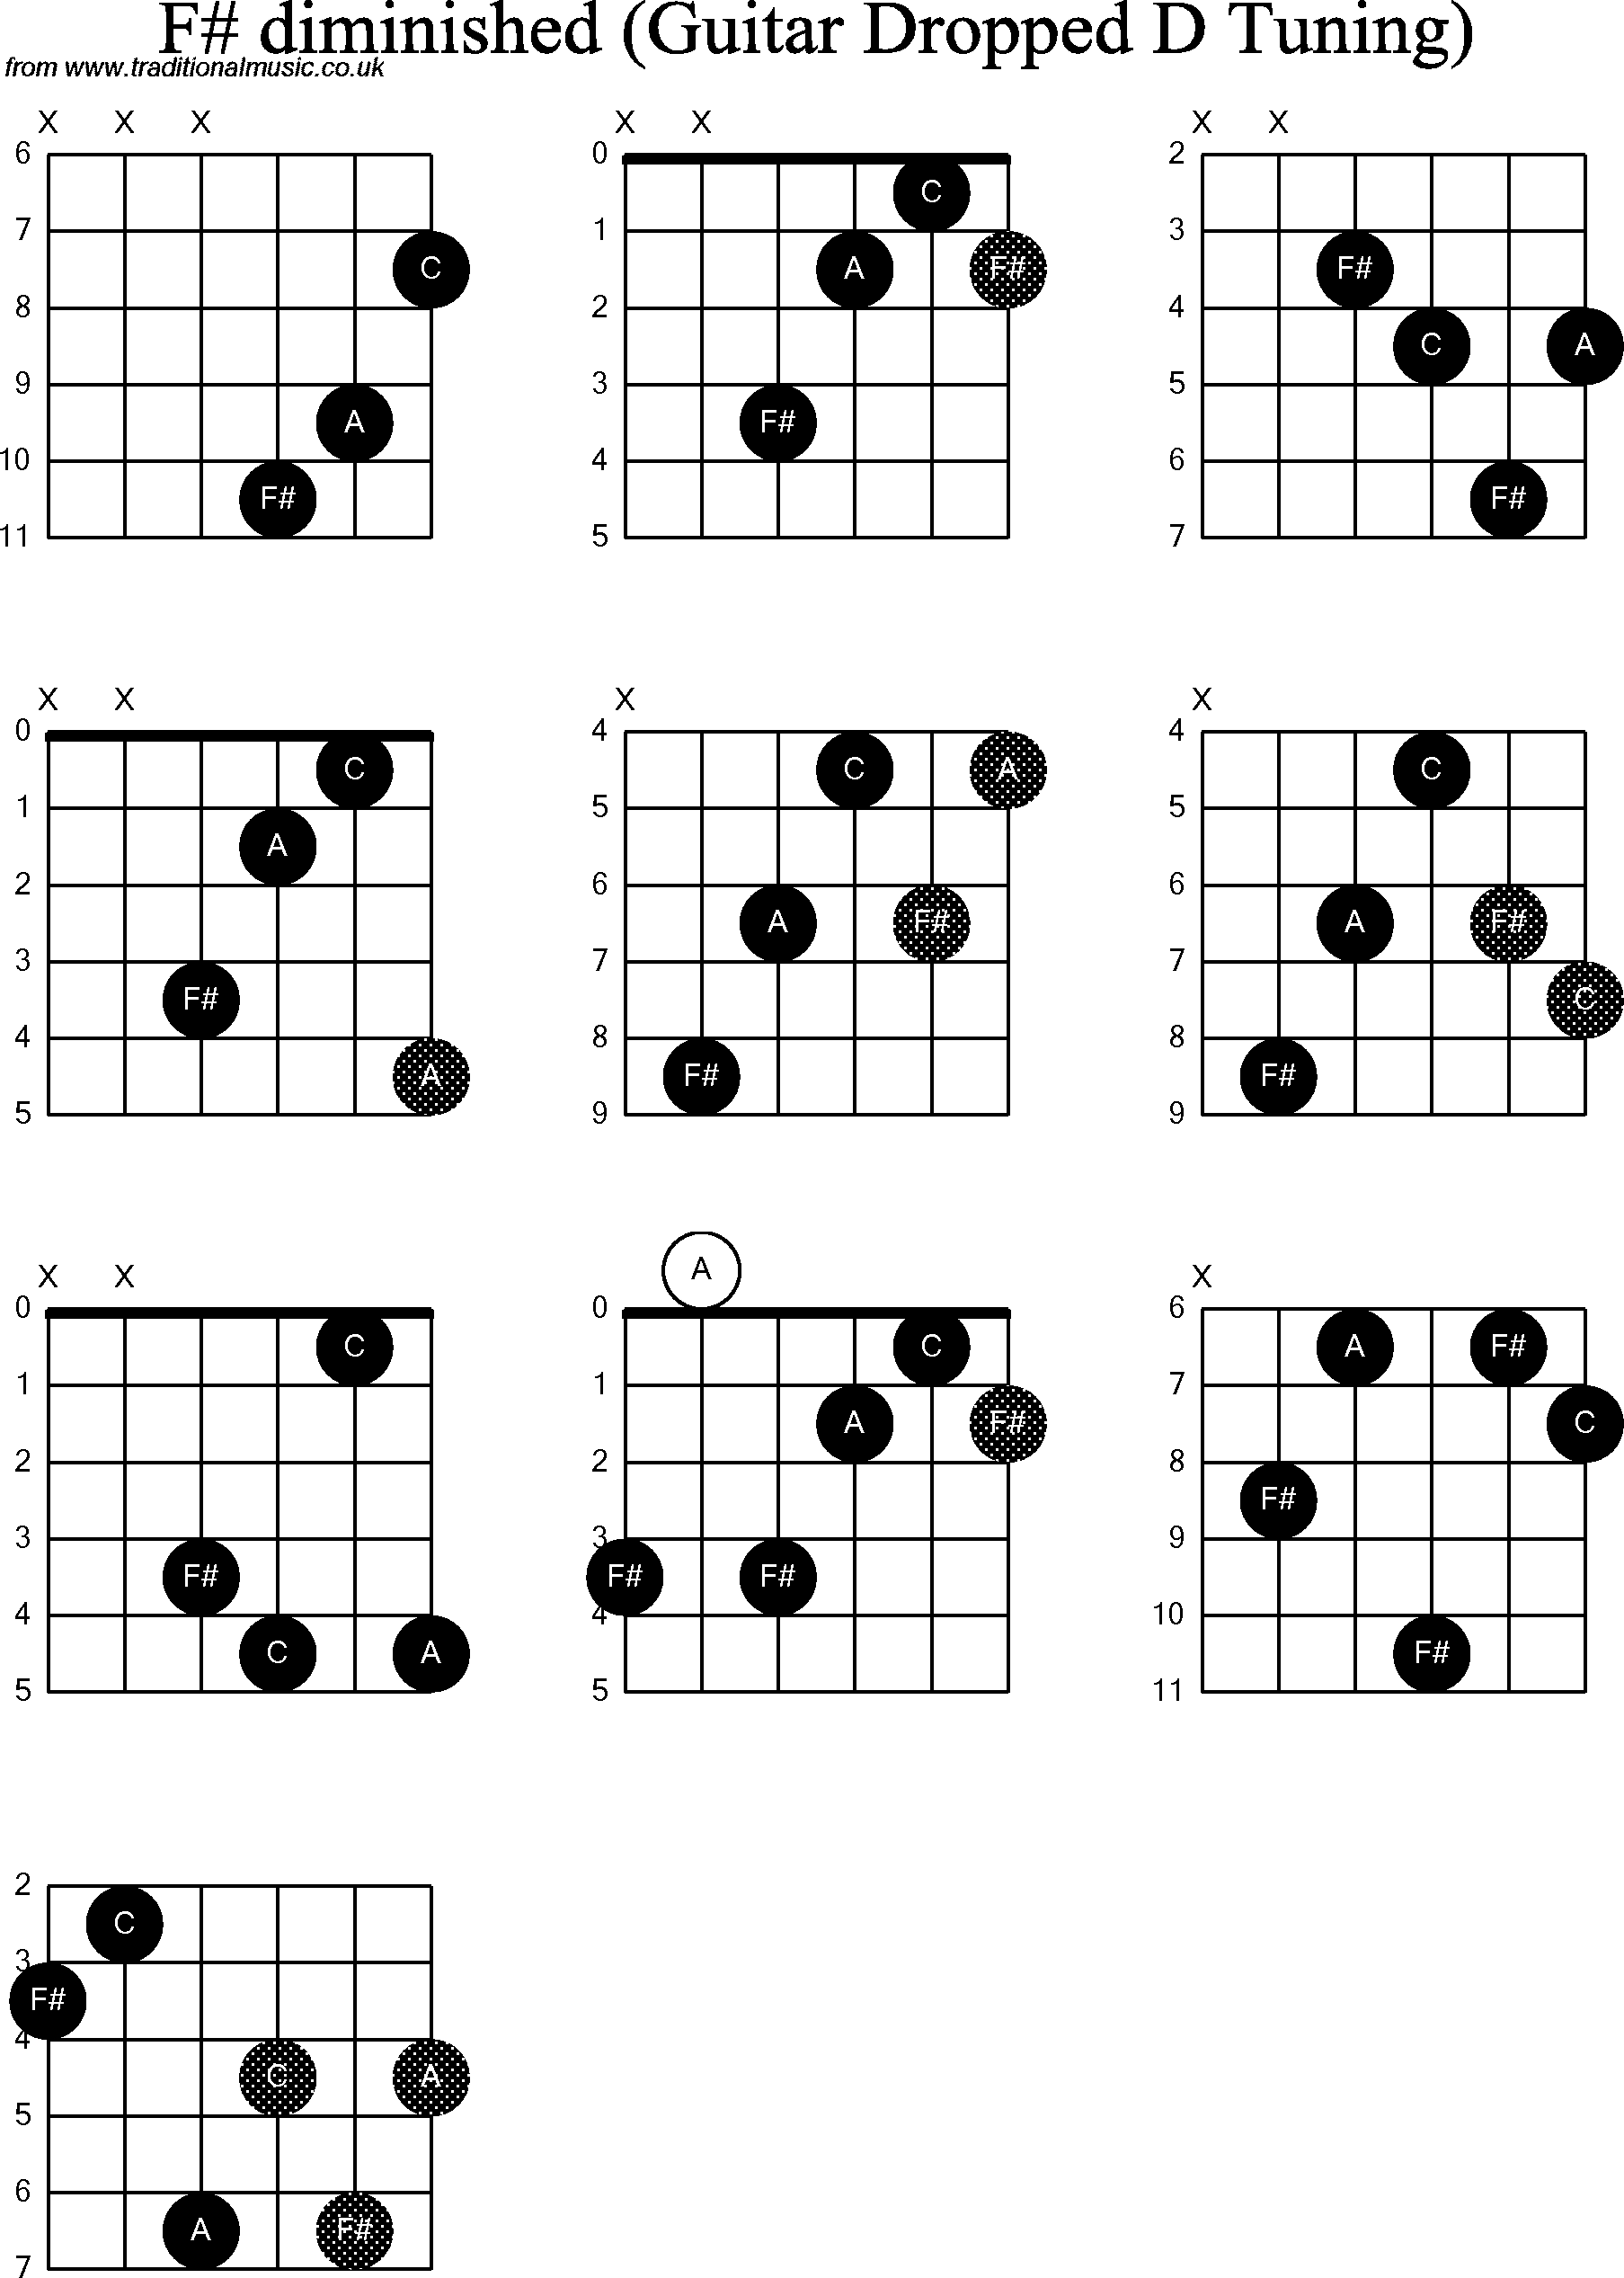 Chord diagrams for dropped D Guitar(DADGBE), F Sharp Diminished